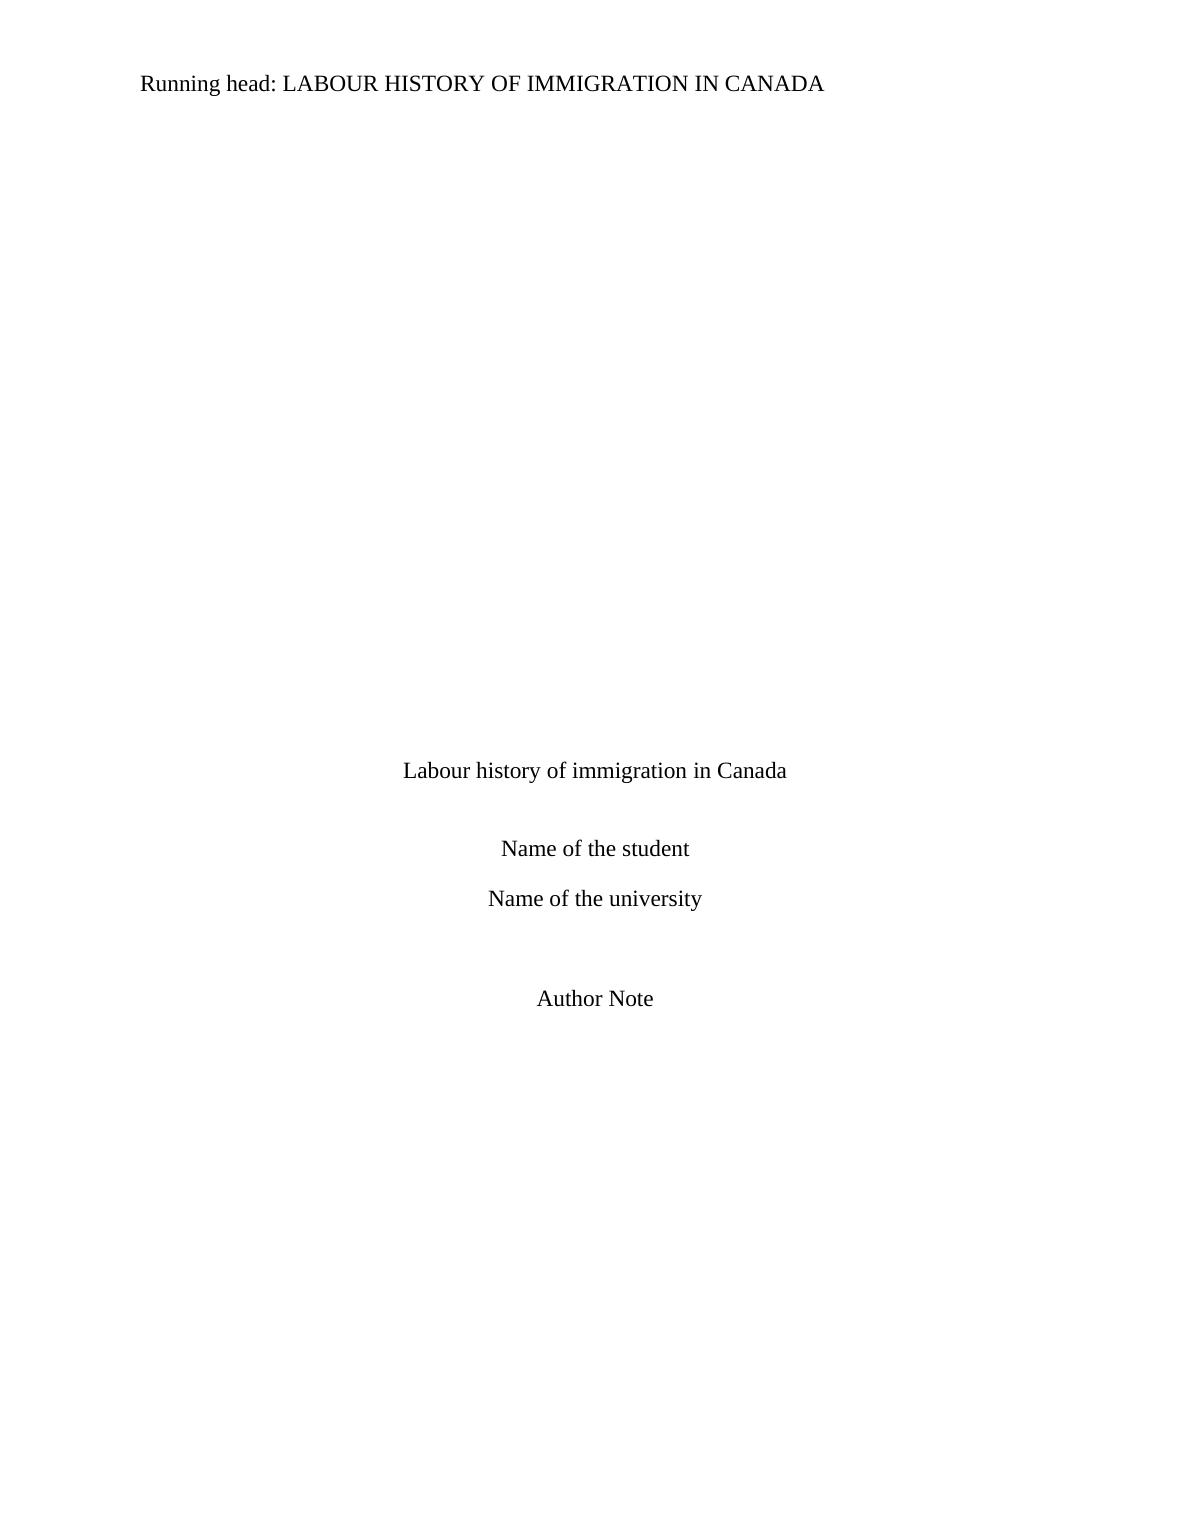 Labour history of immigration in Canada Question 2022_1